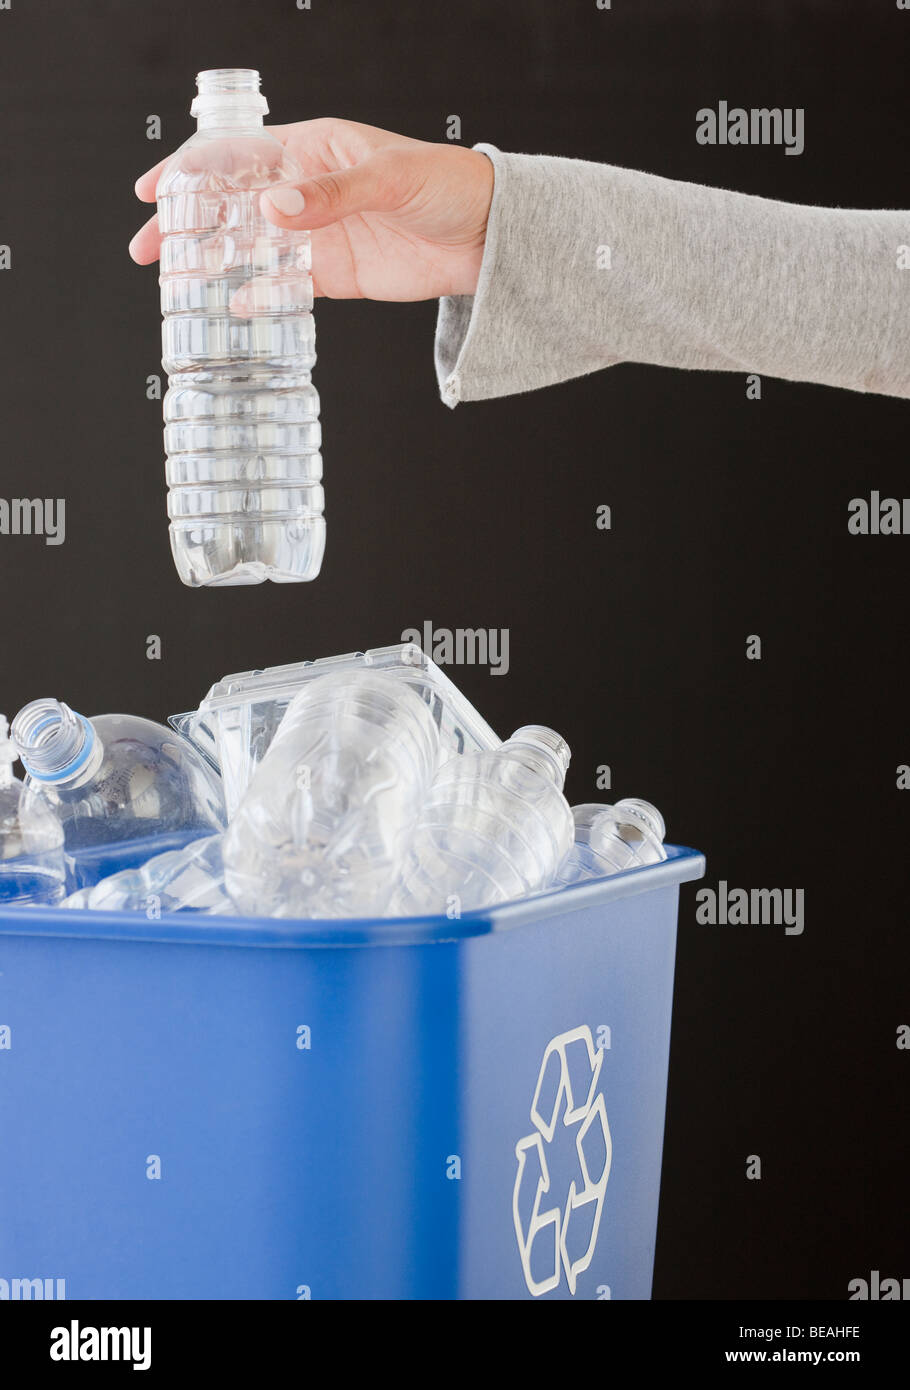 Woman recycling plastic bottle Stock Photo